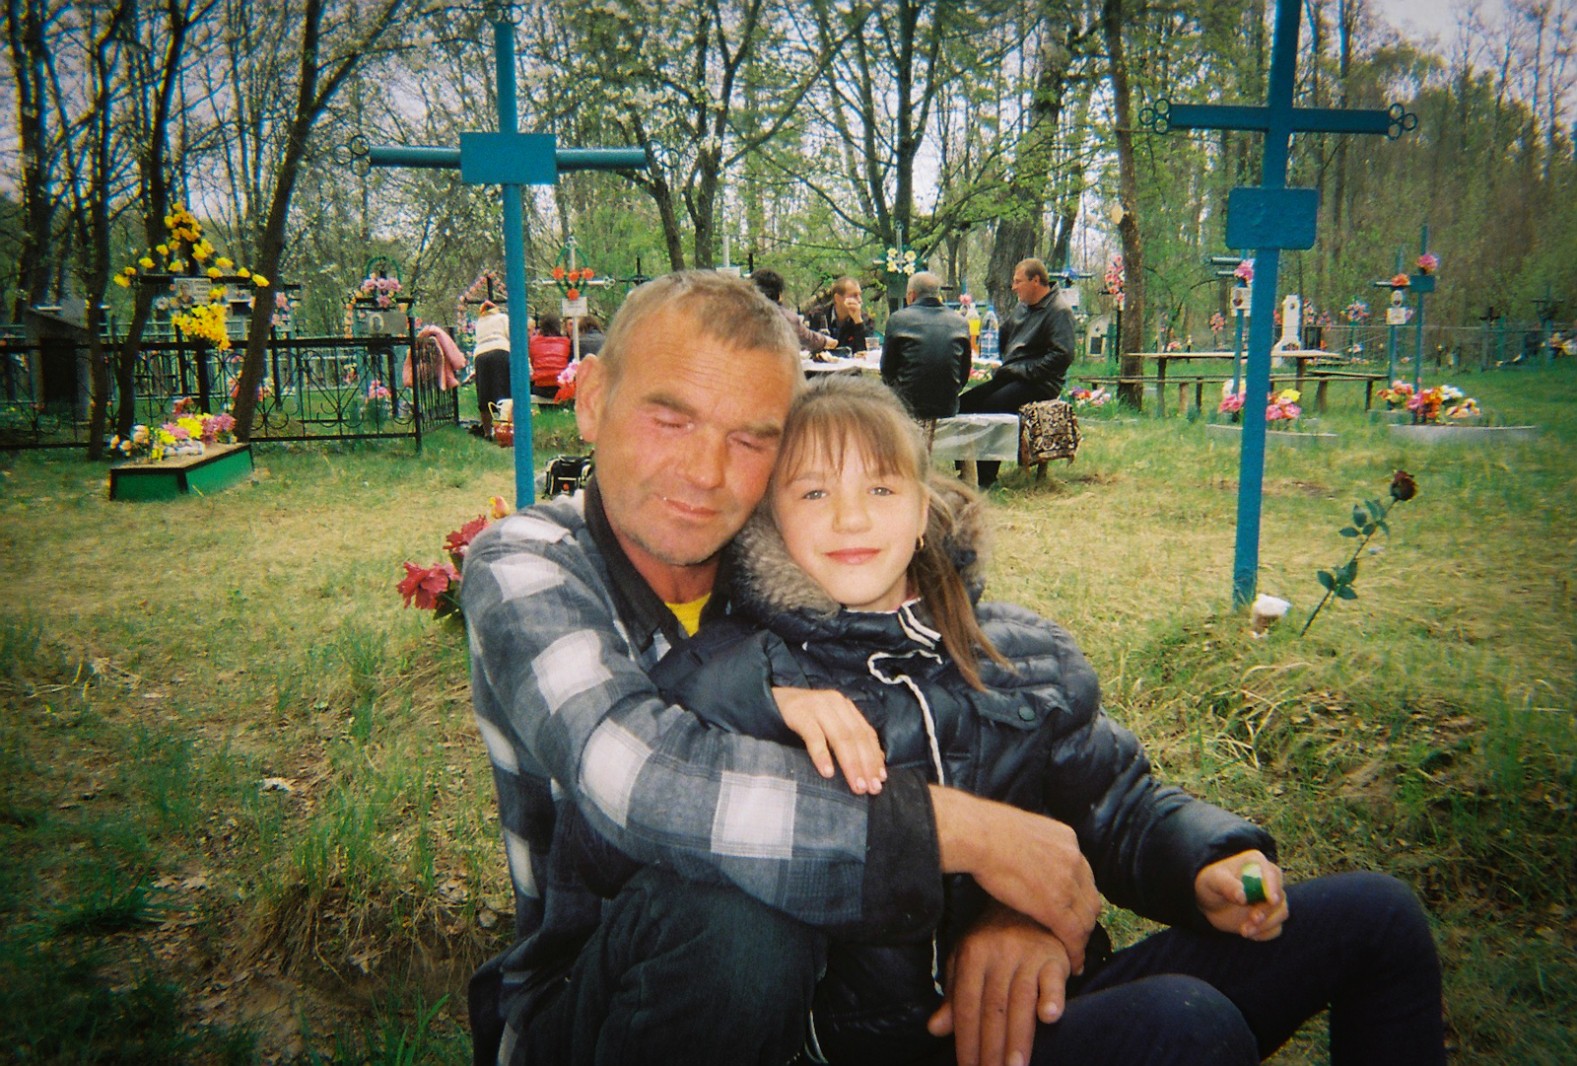 A father and daughter at a local cemetery during Easter celebrations. A table of villagers sit in the background eating and drinking